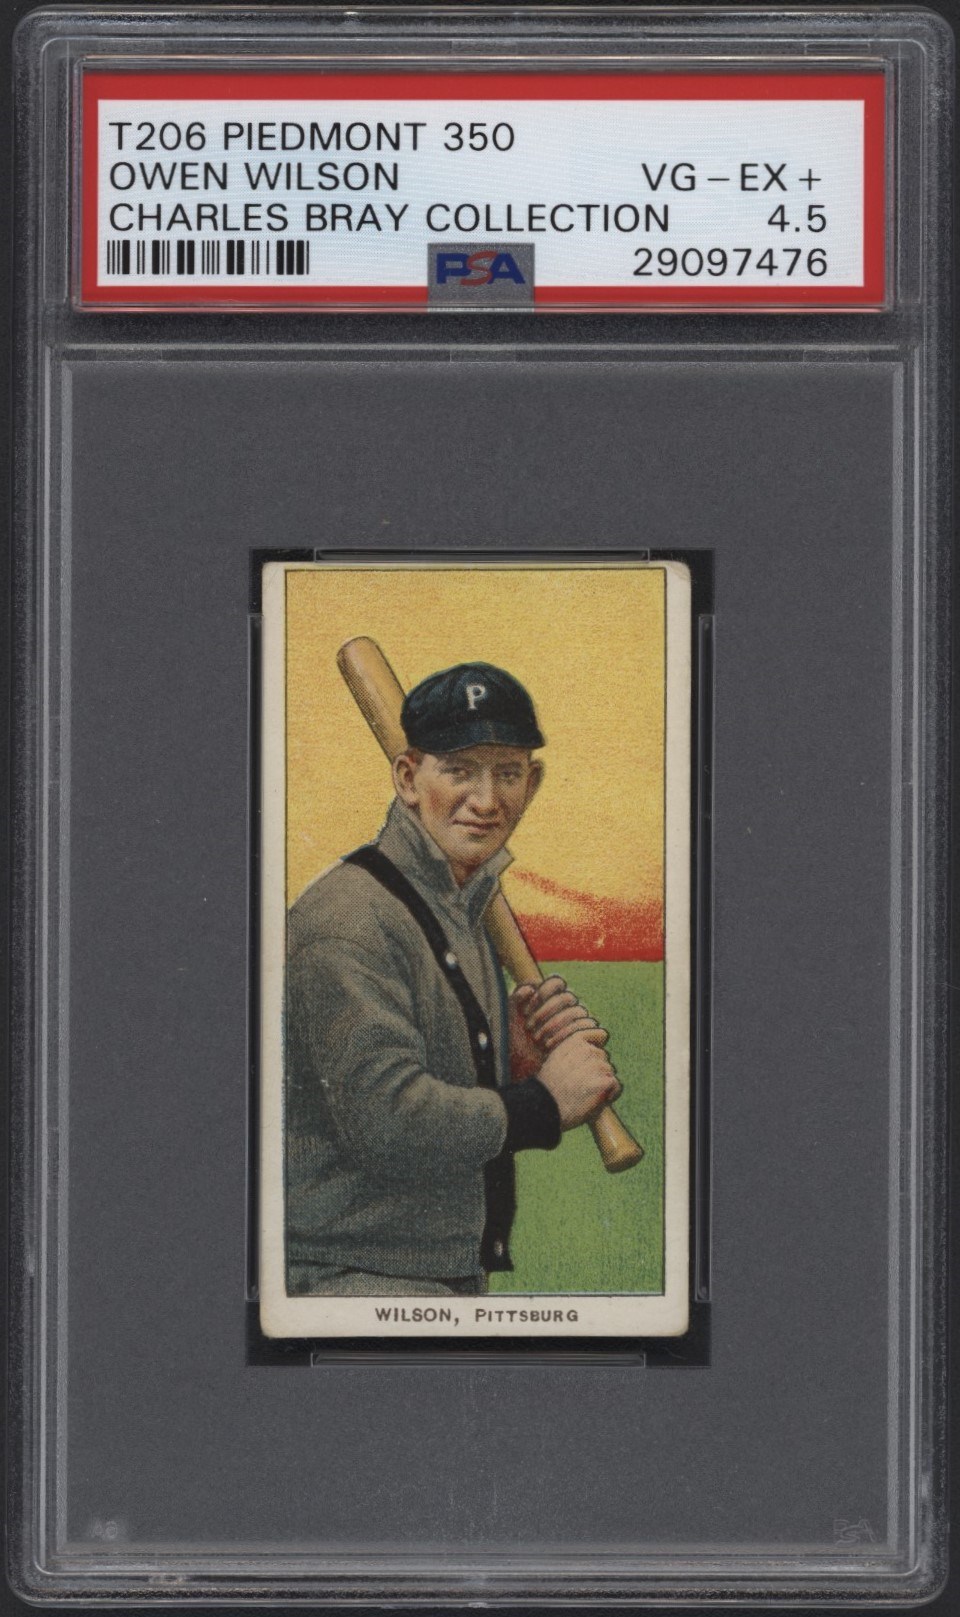 T206 Piedmont 350 Owen Wilson PSA 4.5 From the Charles Bray Collection